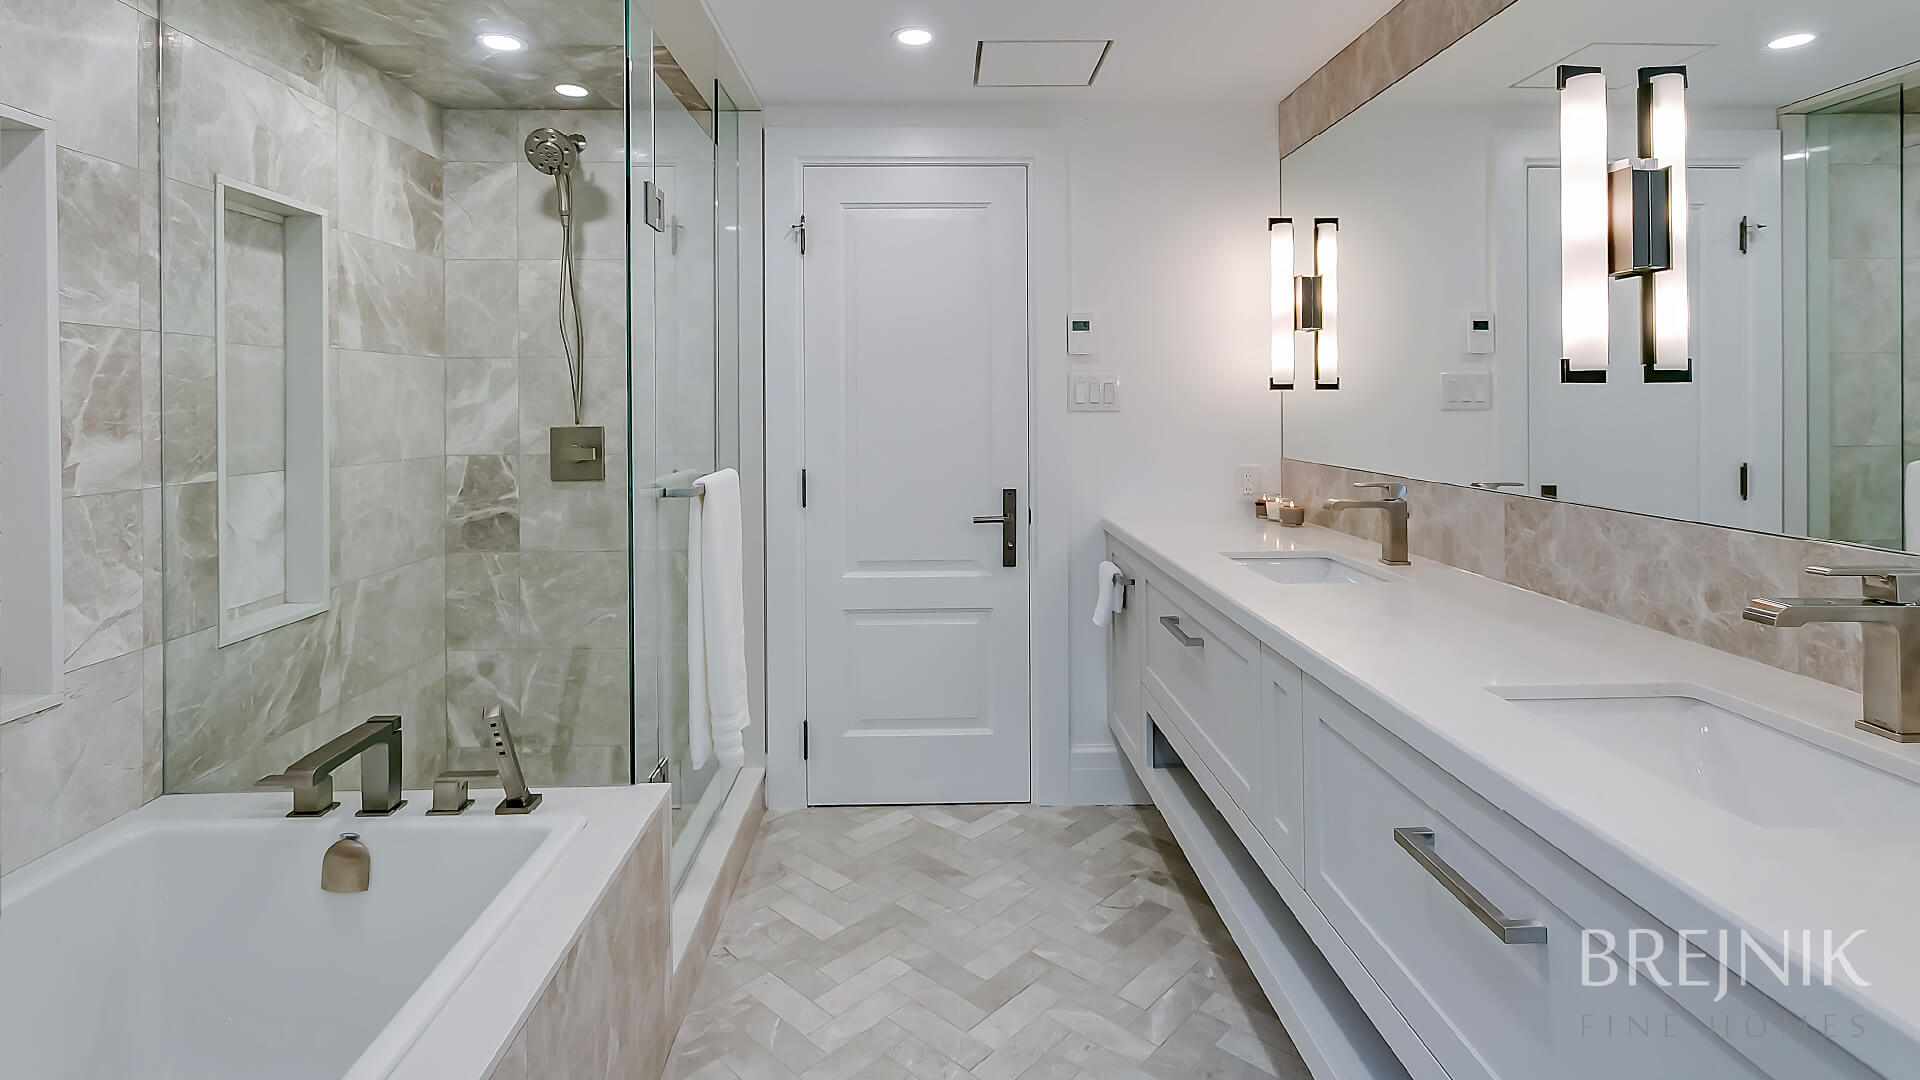 Custom bathroom counters and cabinets